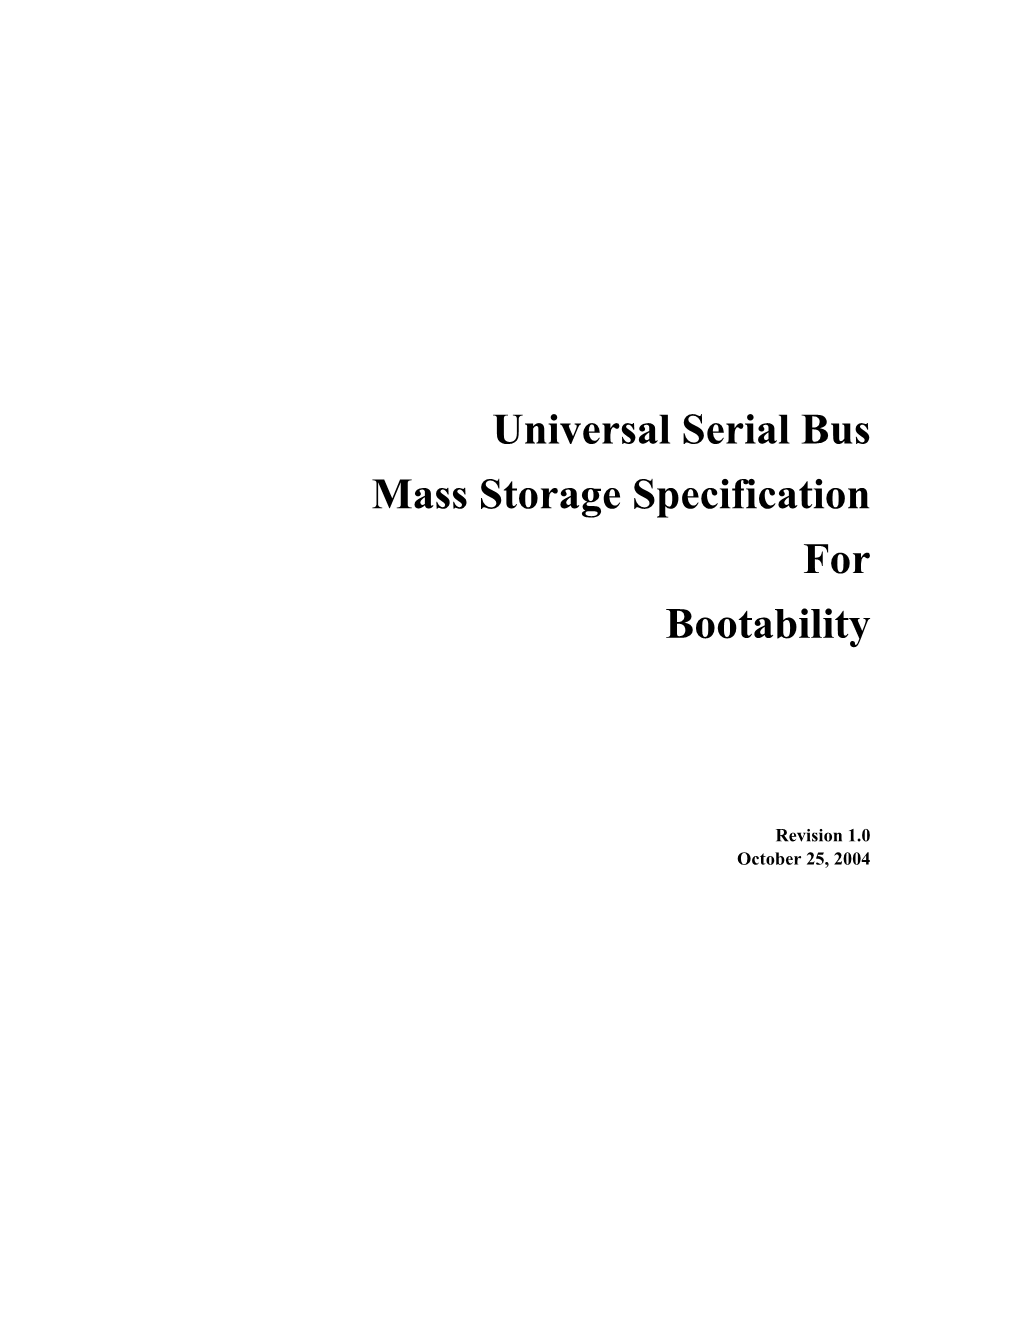 Universal Serial Bus Mass Storage Specification for Bootability